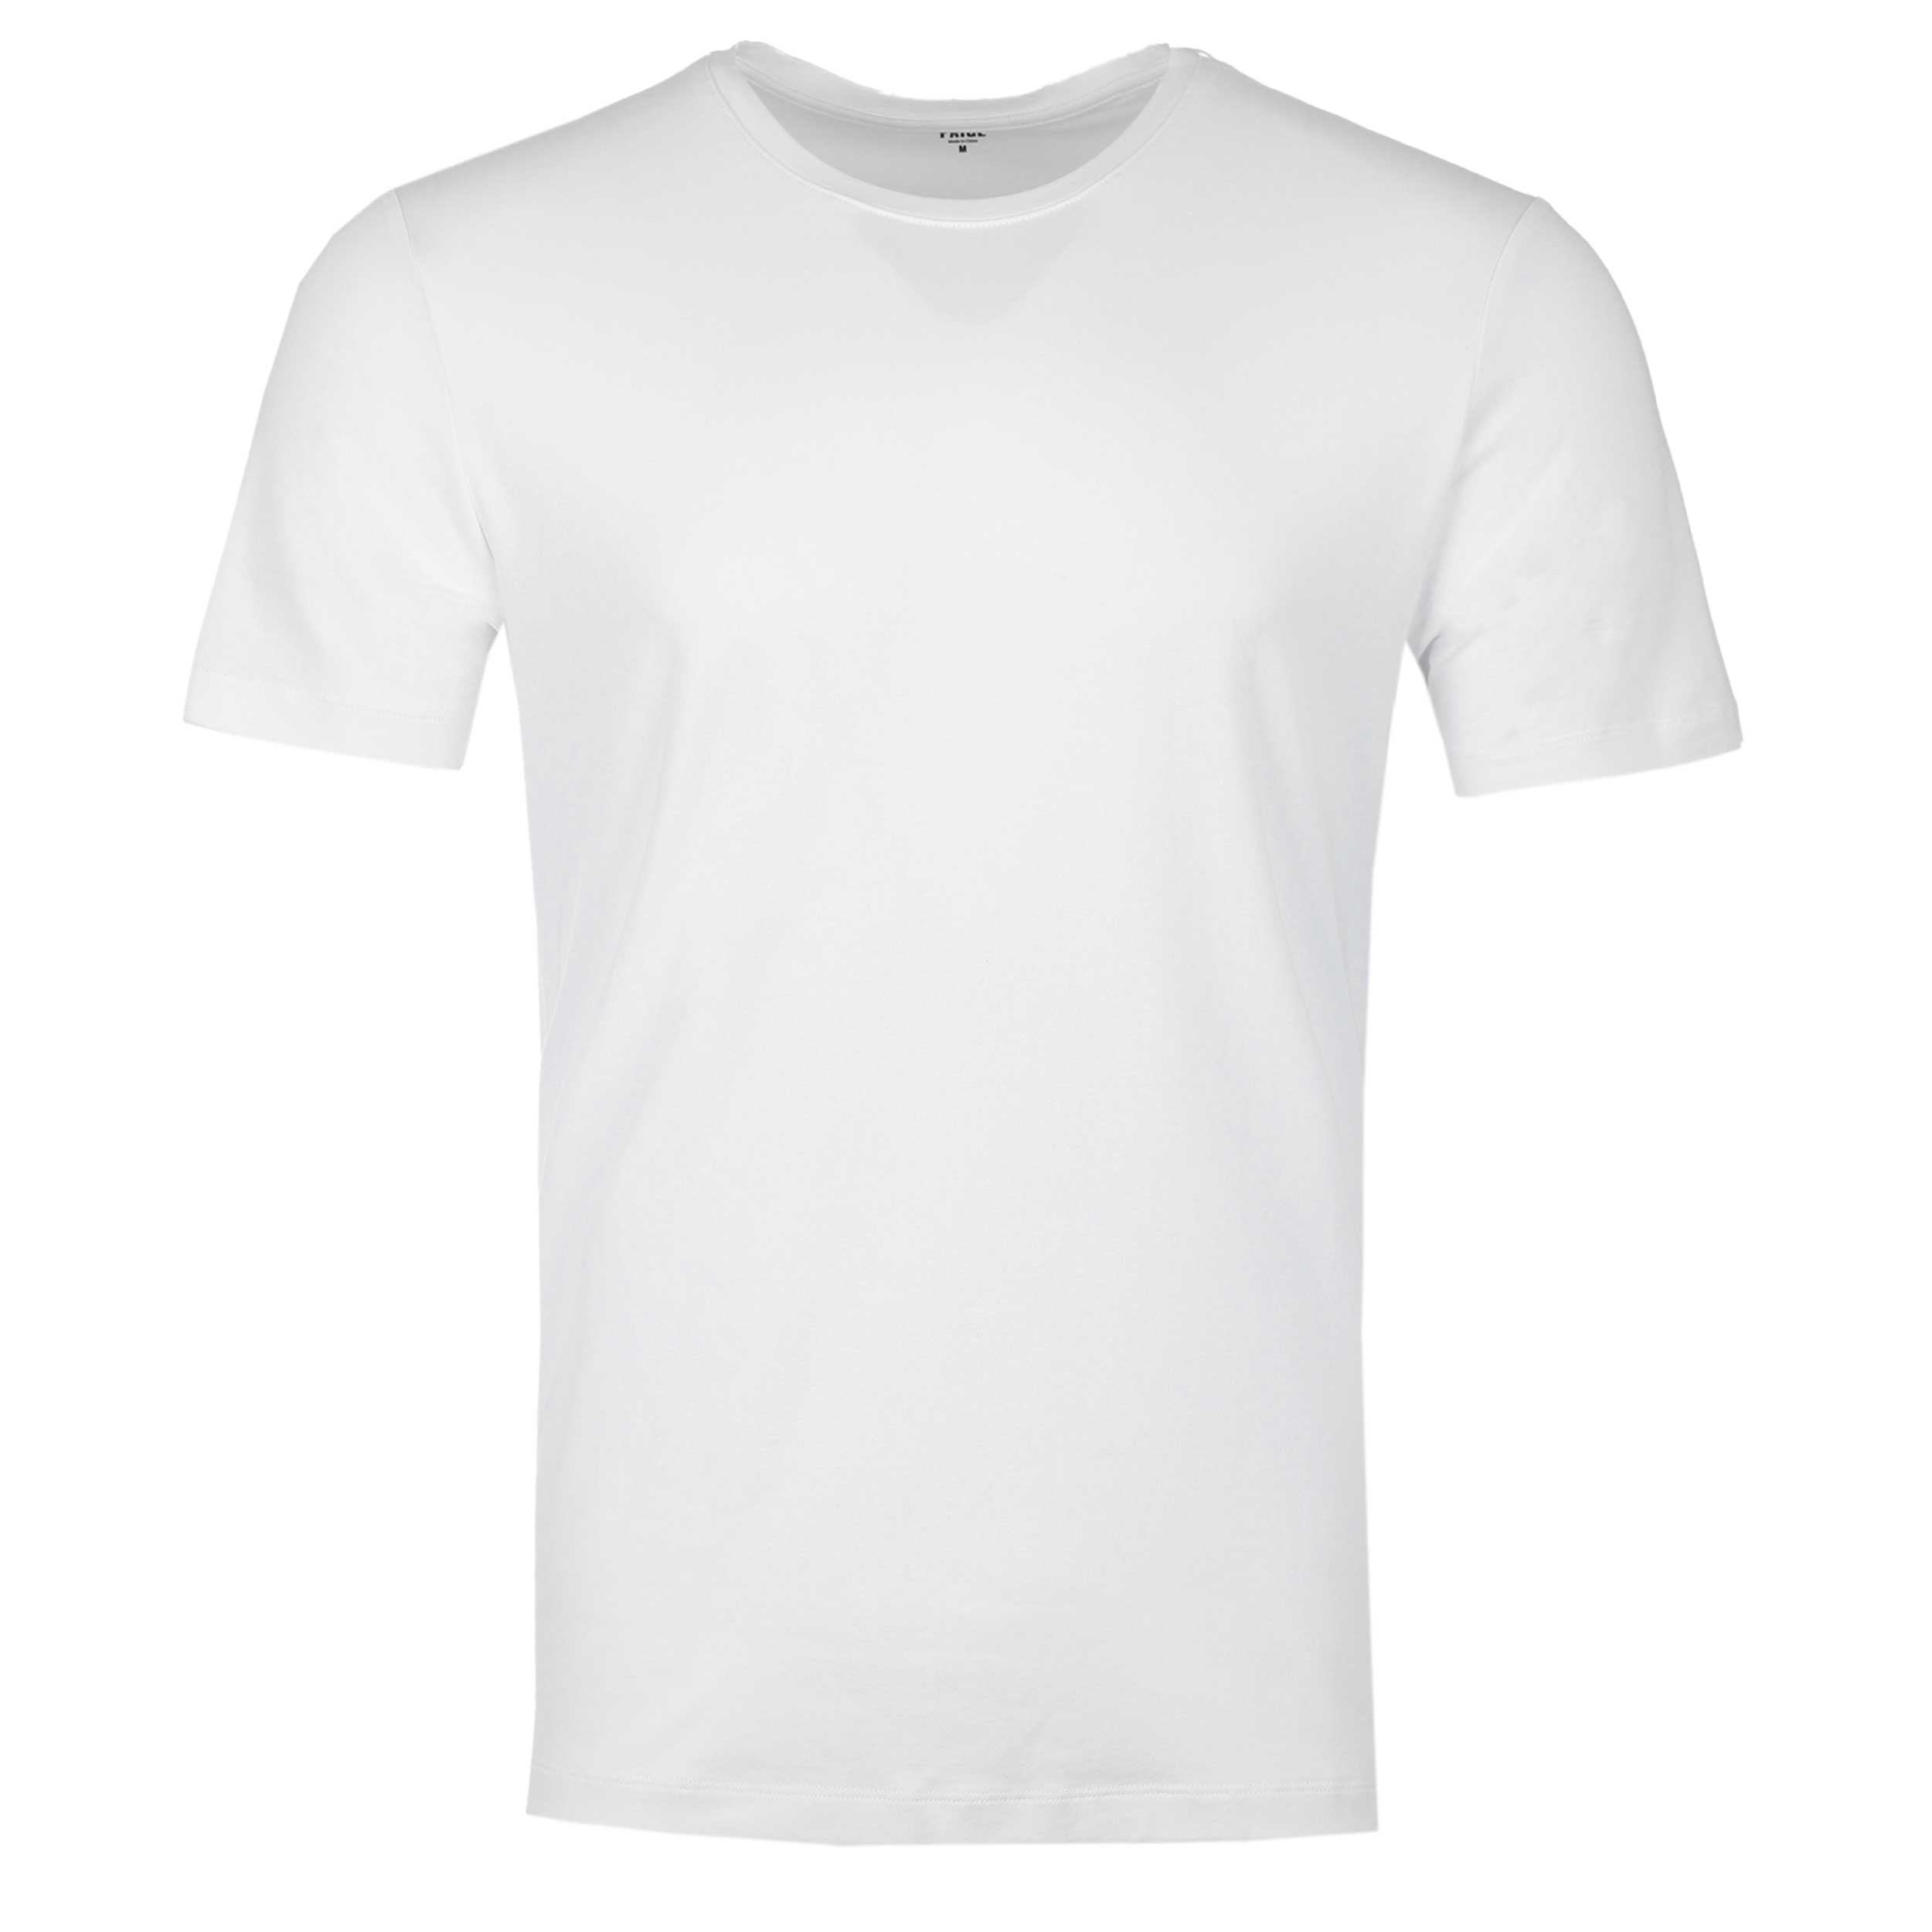 Paige Cash T Shirt in White